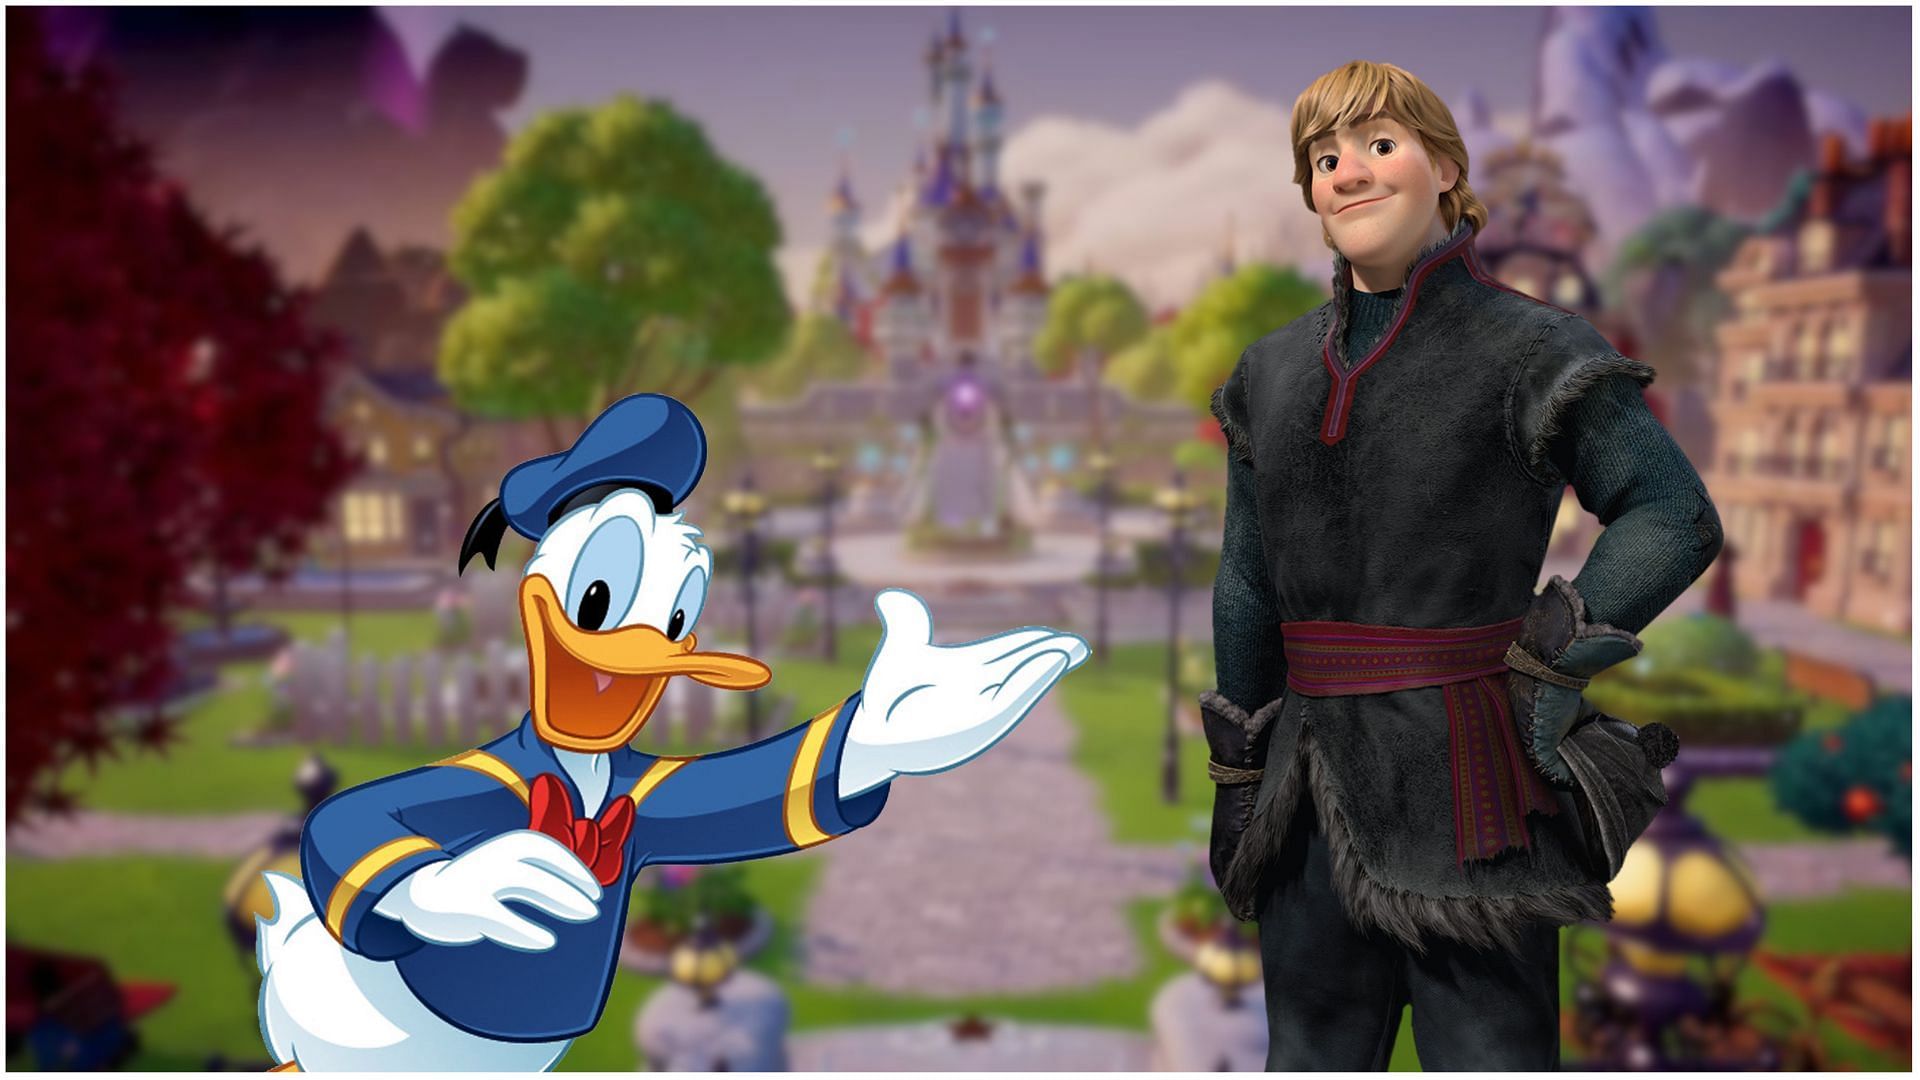 Donald and Kristoff are two characters you can meet in Disney Dreamlight Valley (Image via Gameloft and Disney)